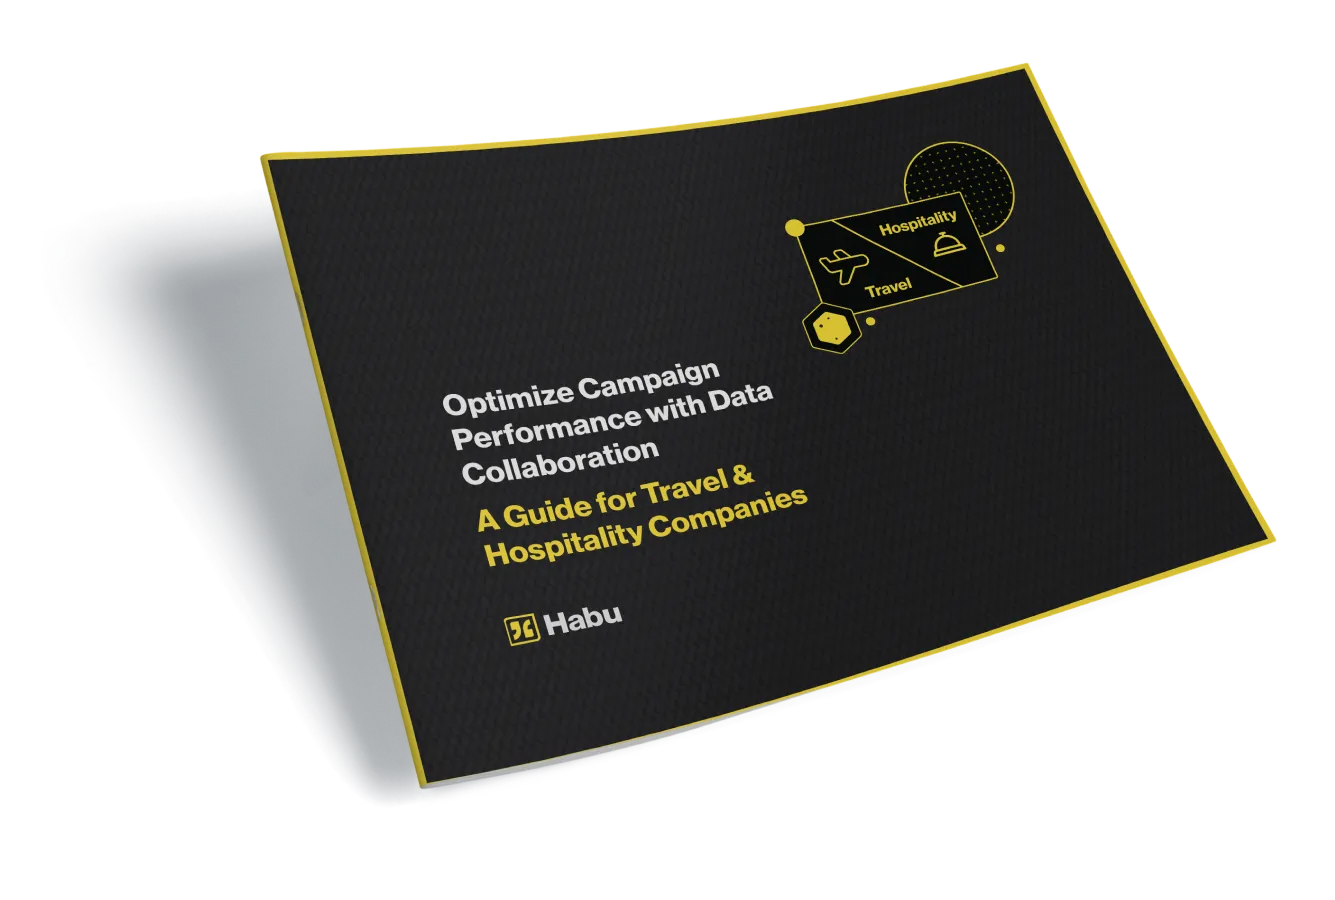 Optimize Campaign Performance with Data Collaboration